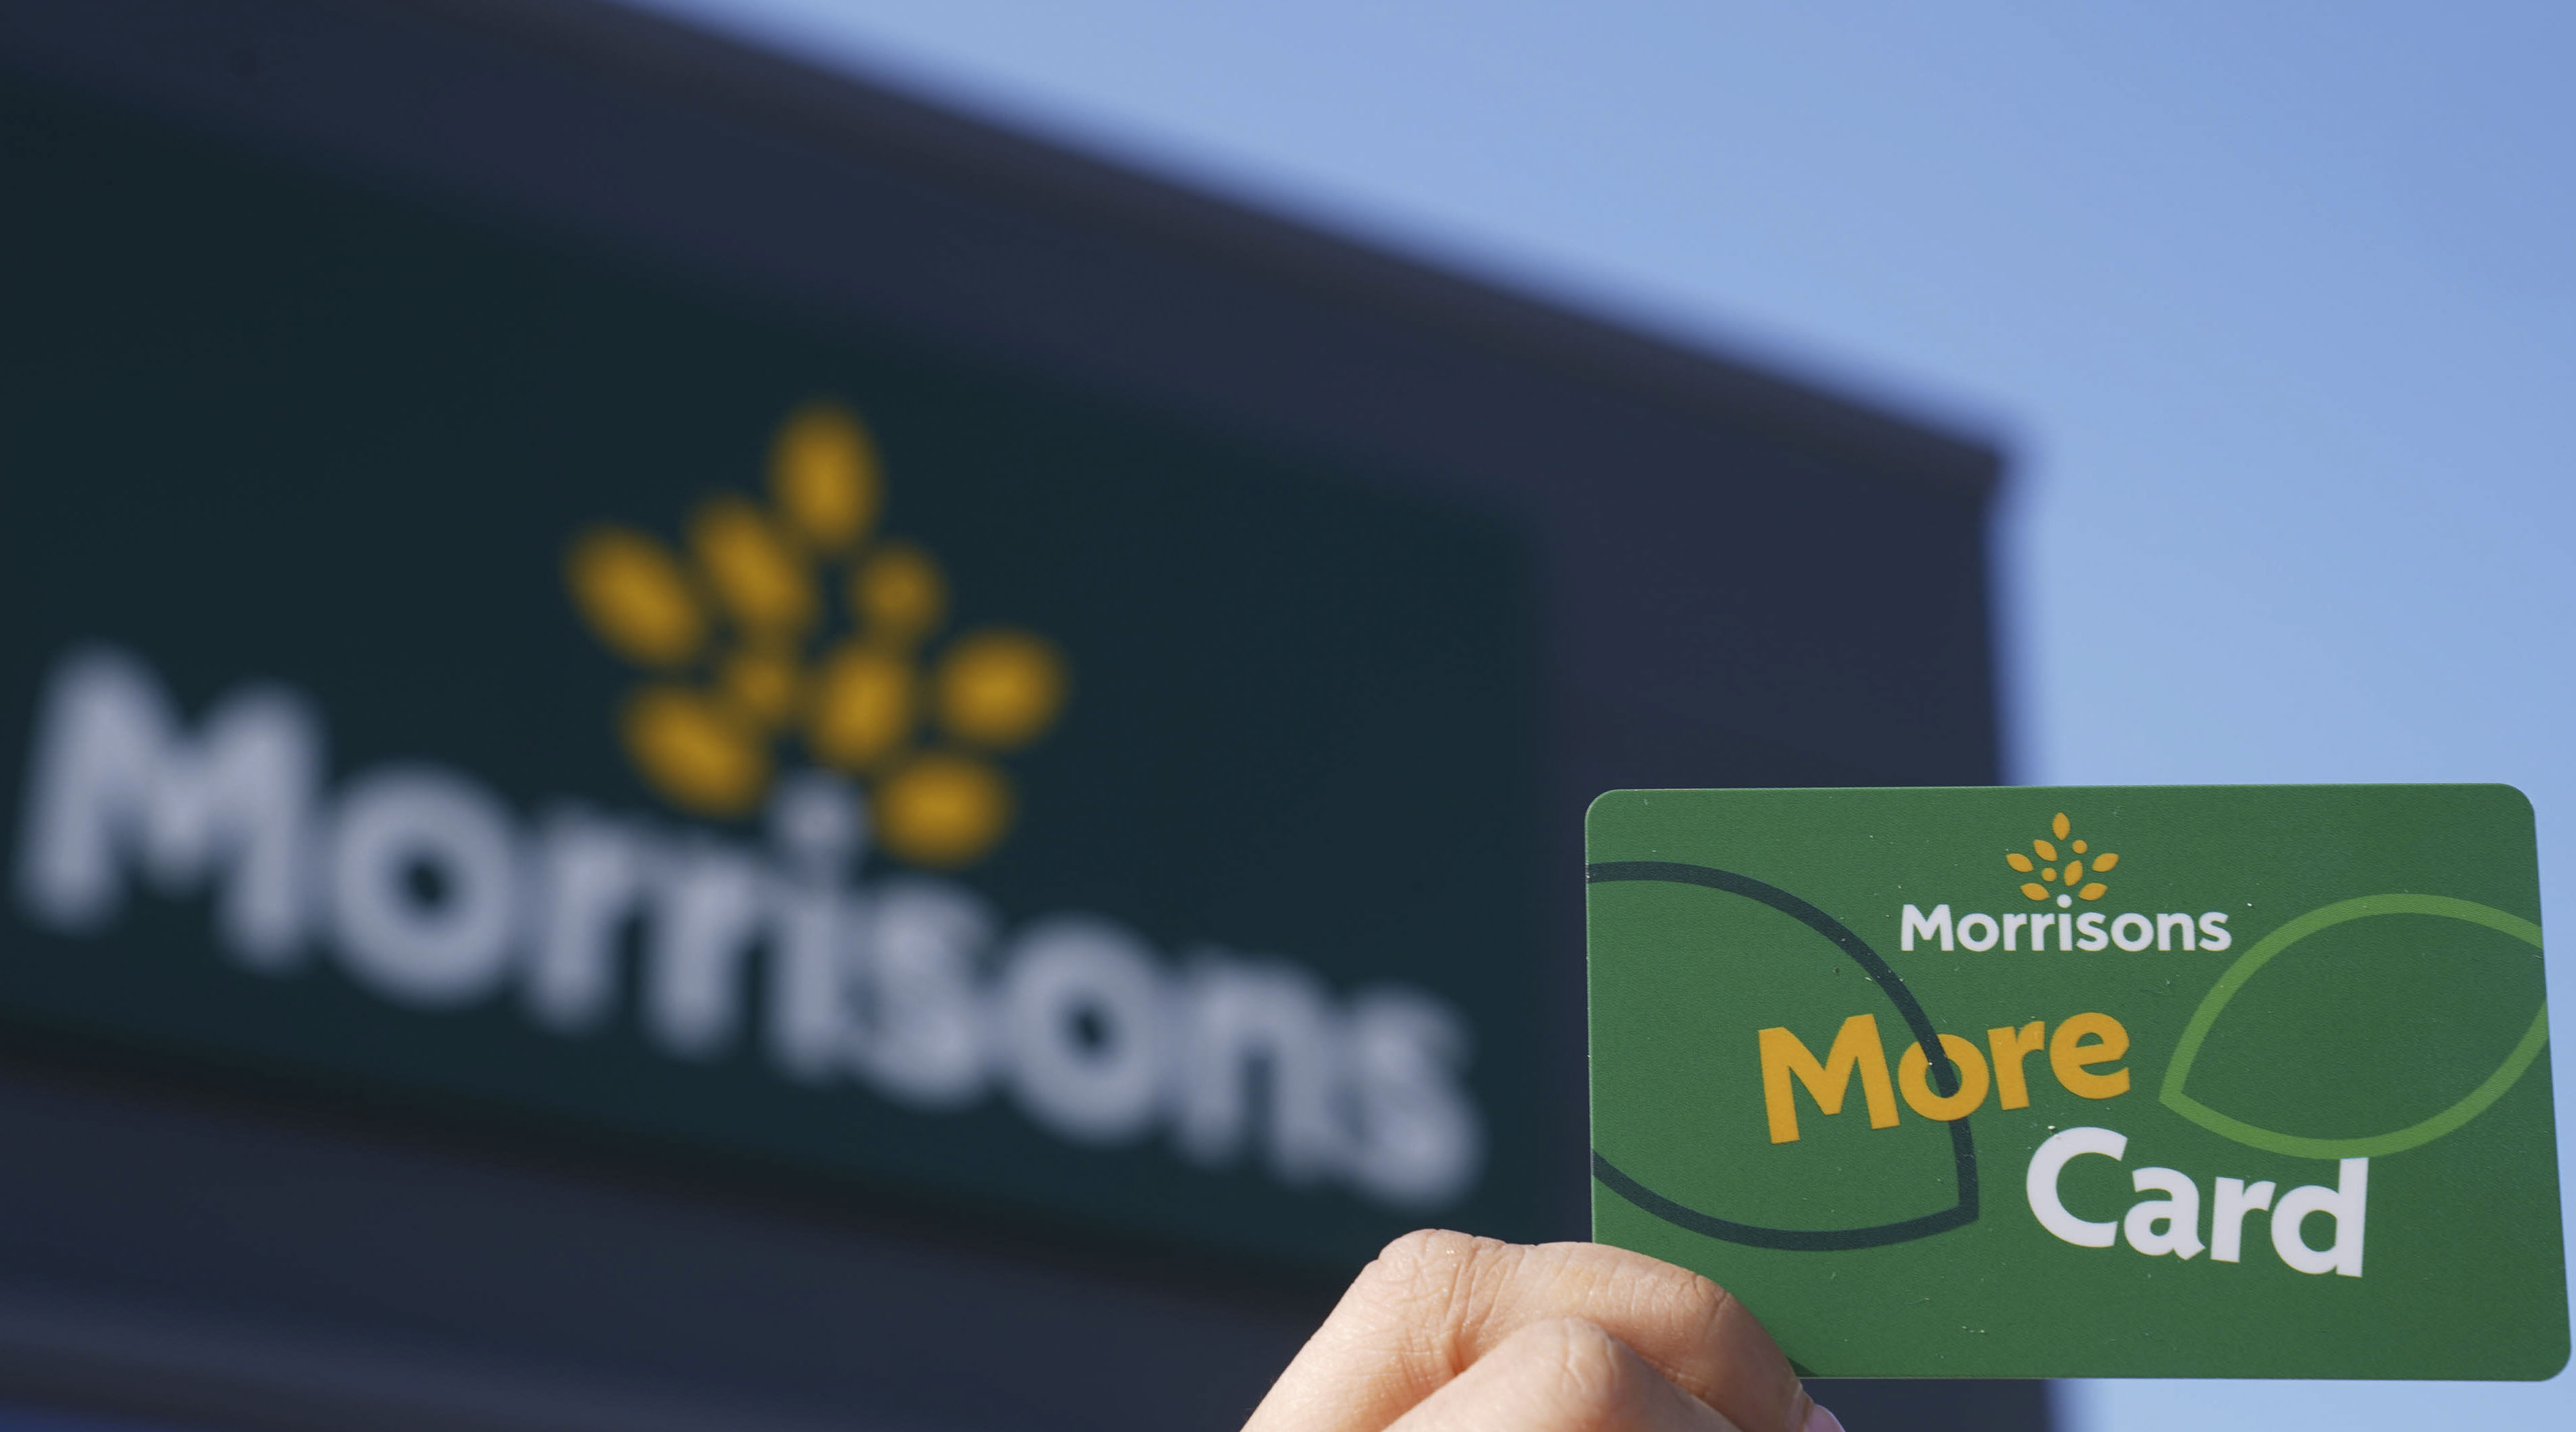 "More reasons to shop at Morrisons" as Morrisons Fivers are back